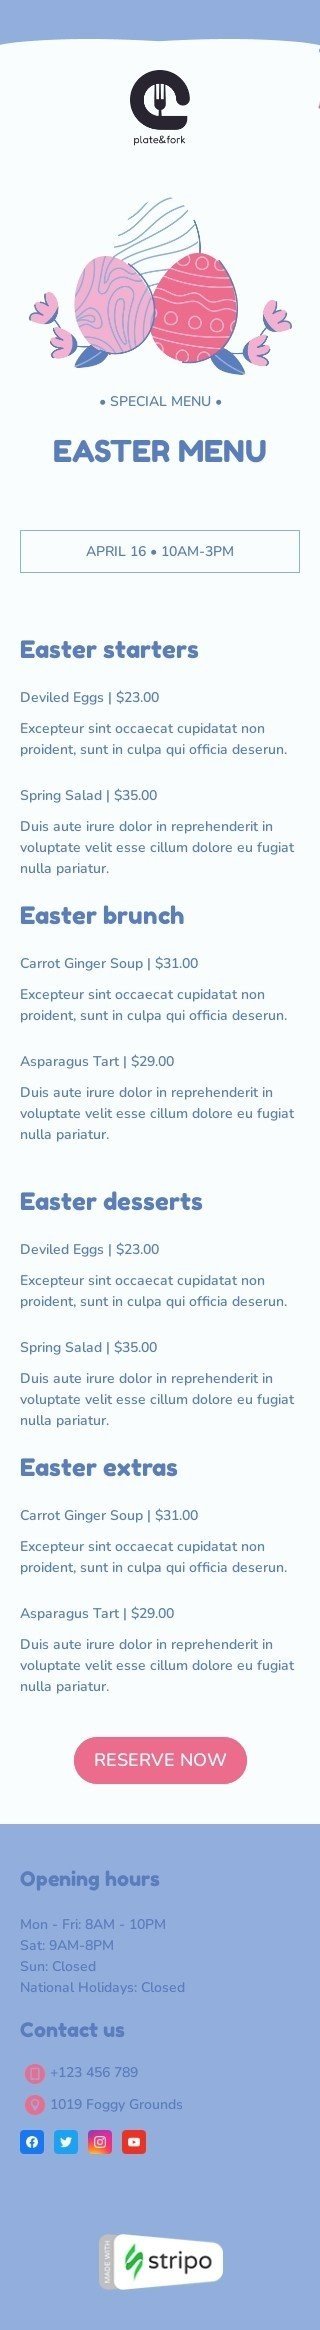 Easter email template "Easter menu" for food industry mobile view